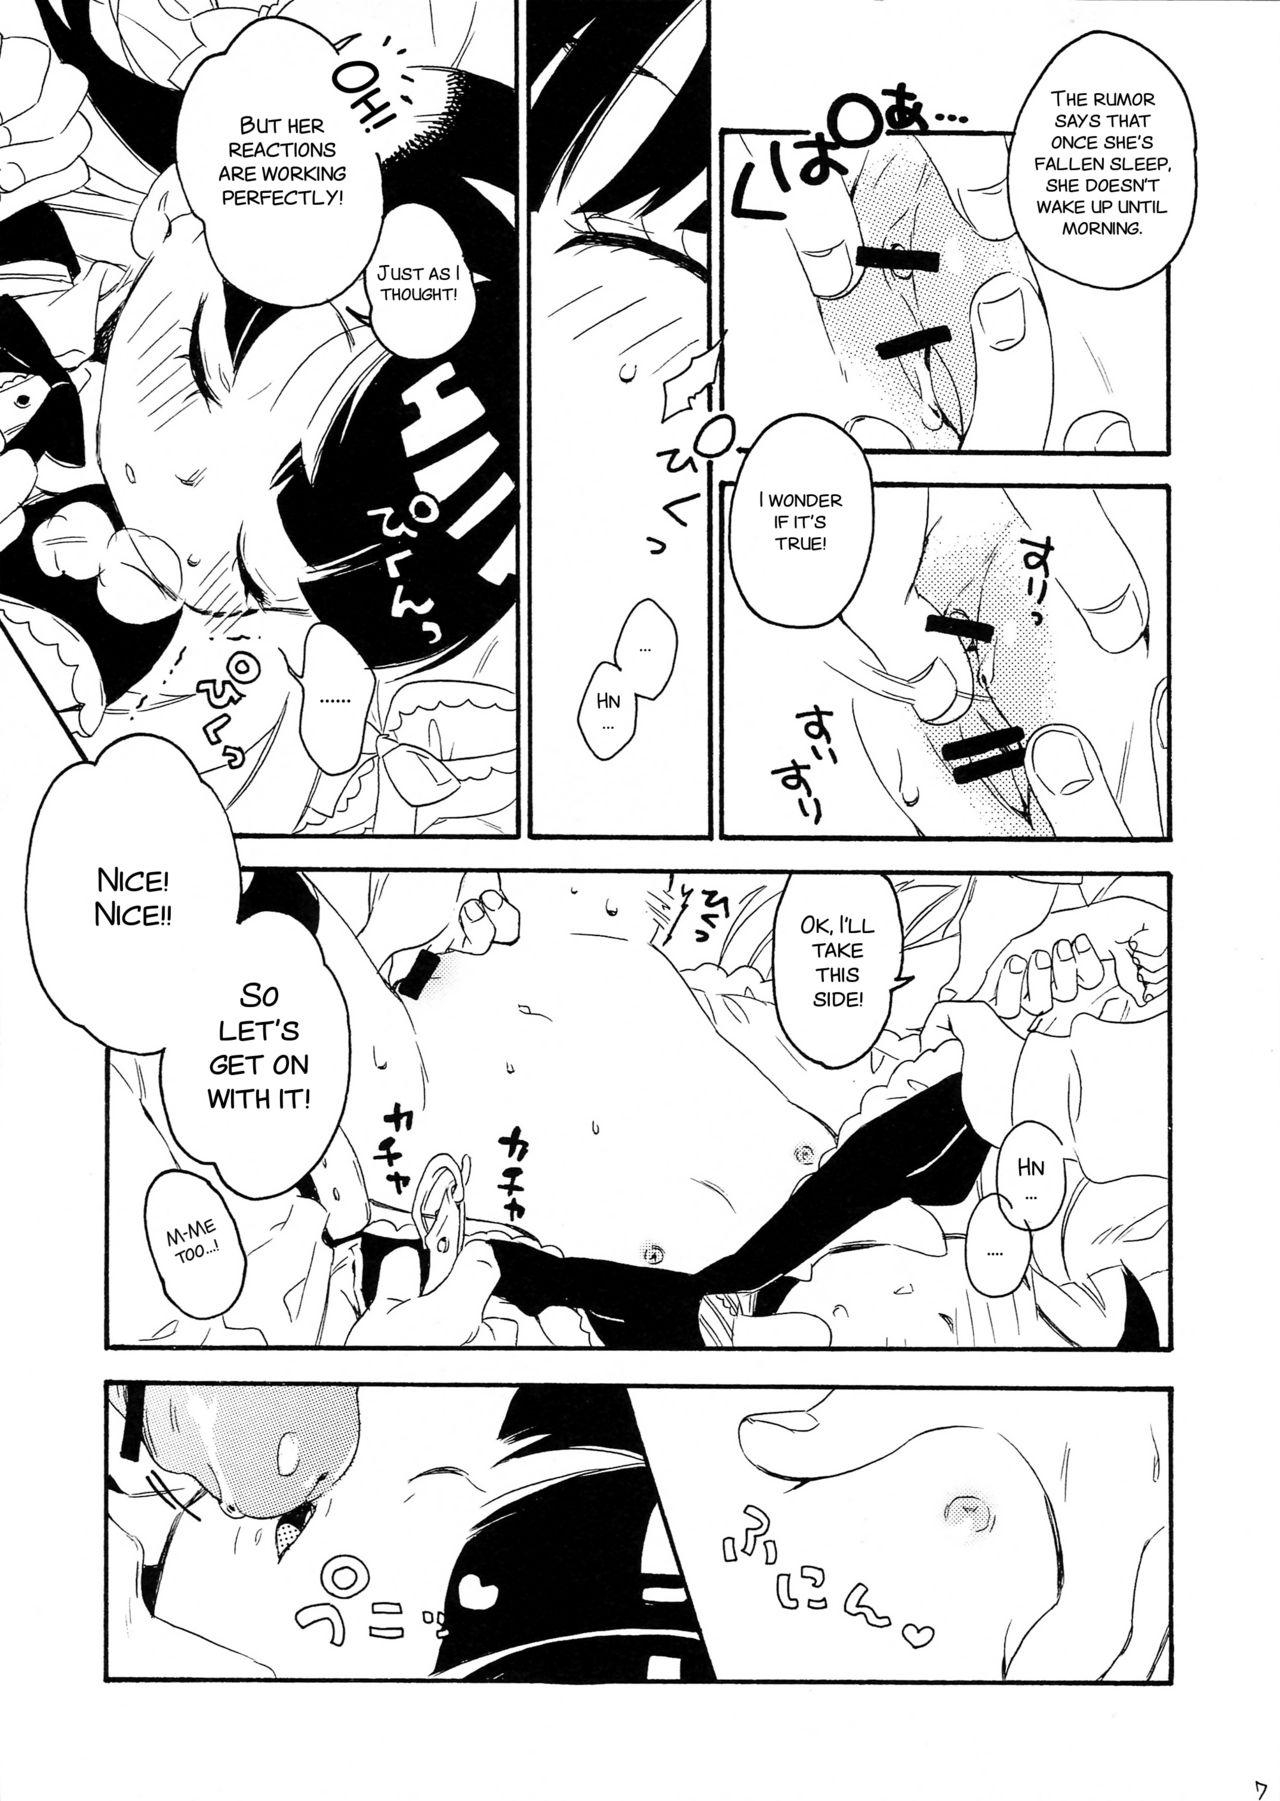 Shemale Stop Daydreaming! - Panty and stocking with garterbelt Vergon - Page 7